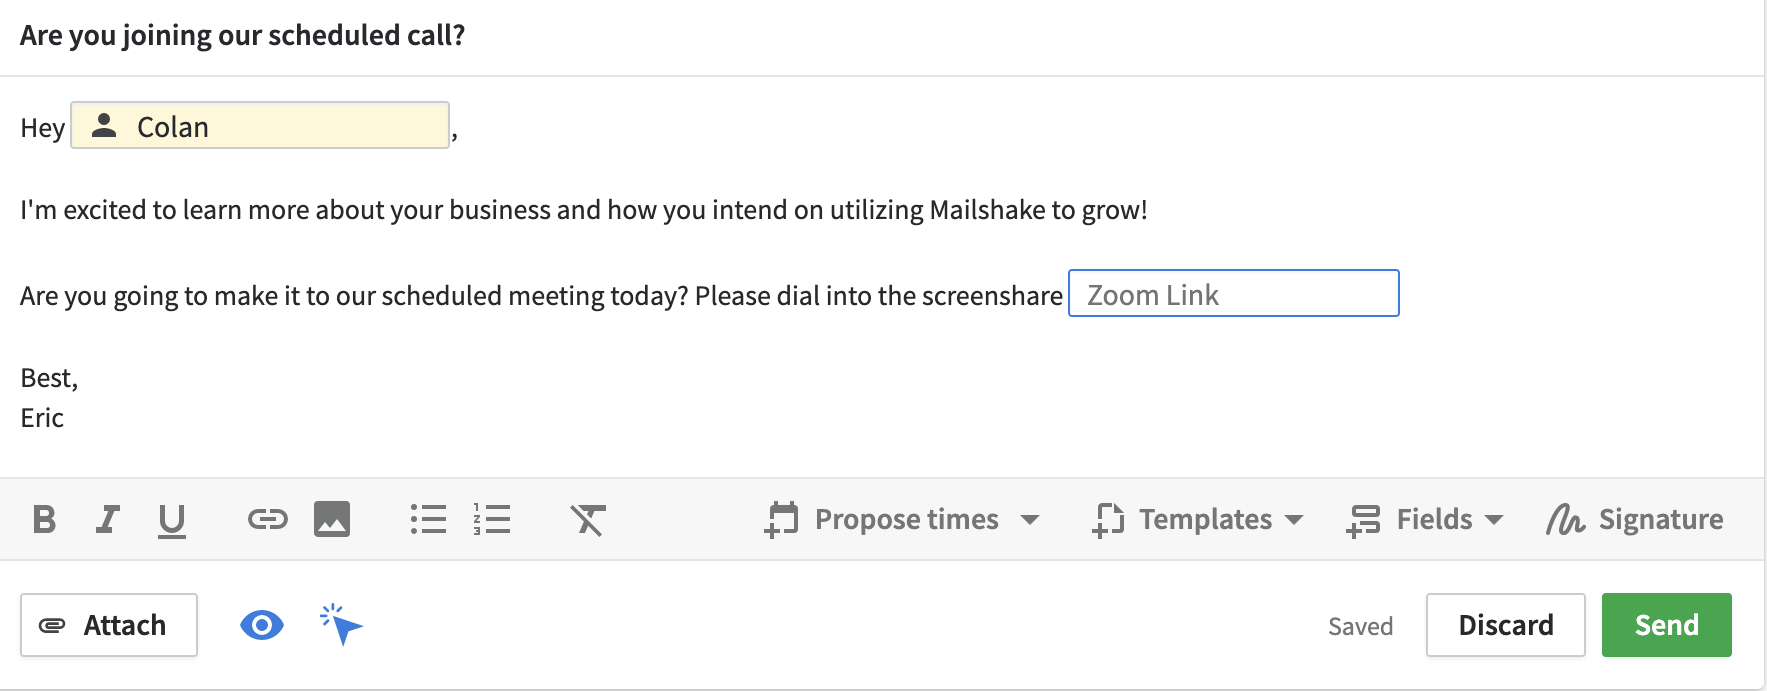 mailshake are you joining our call